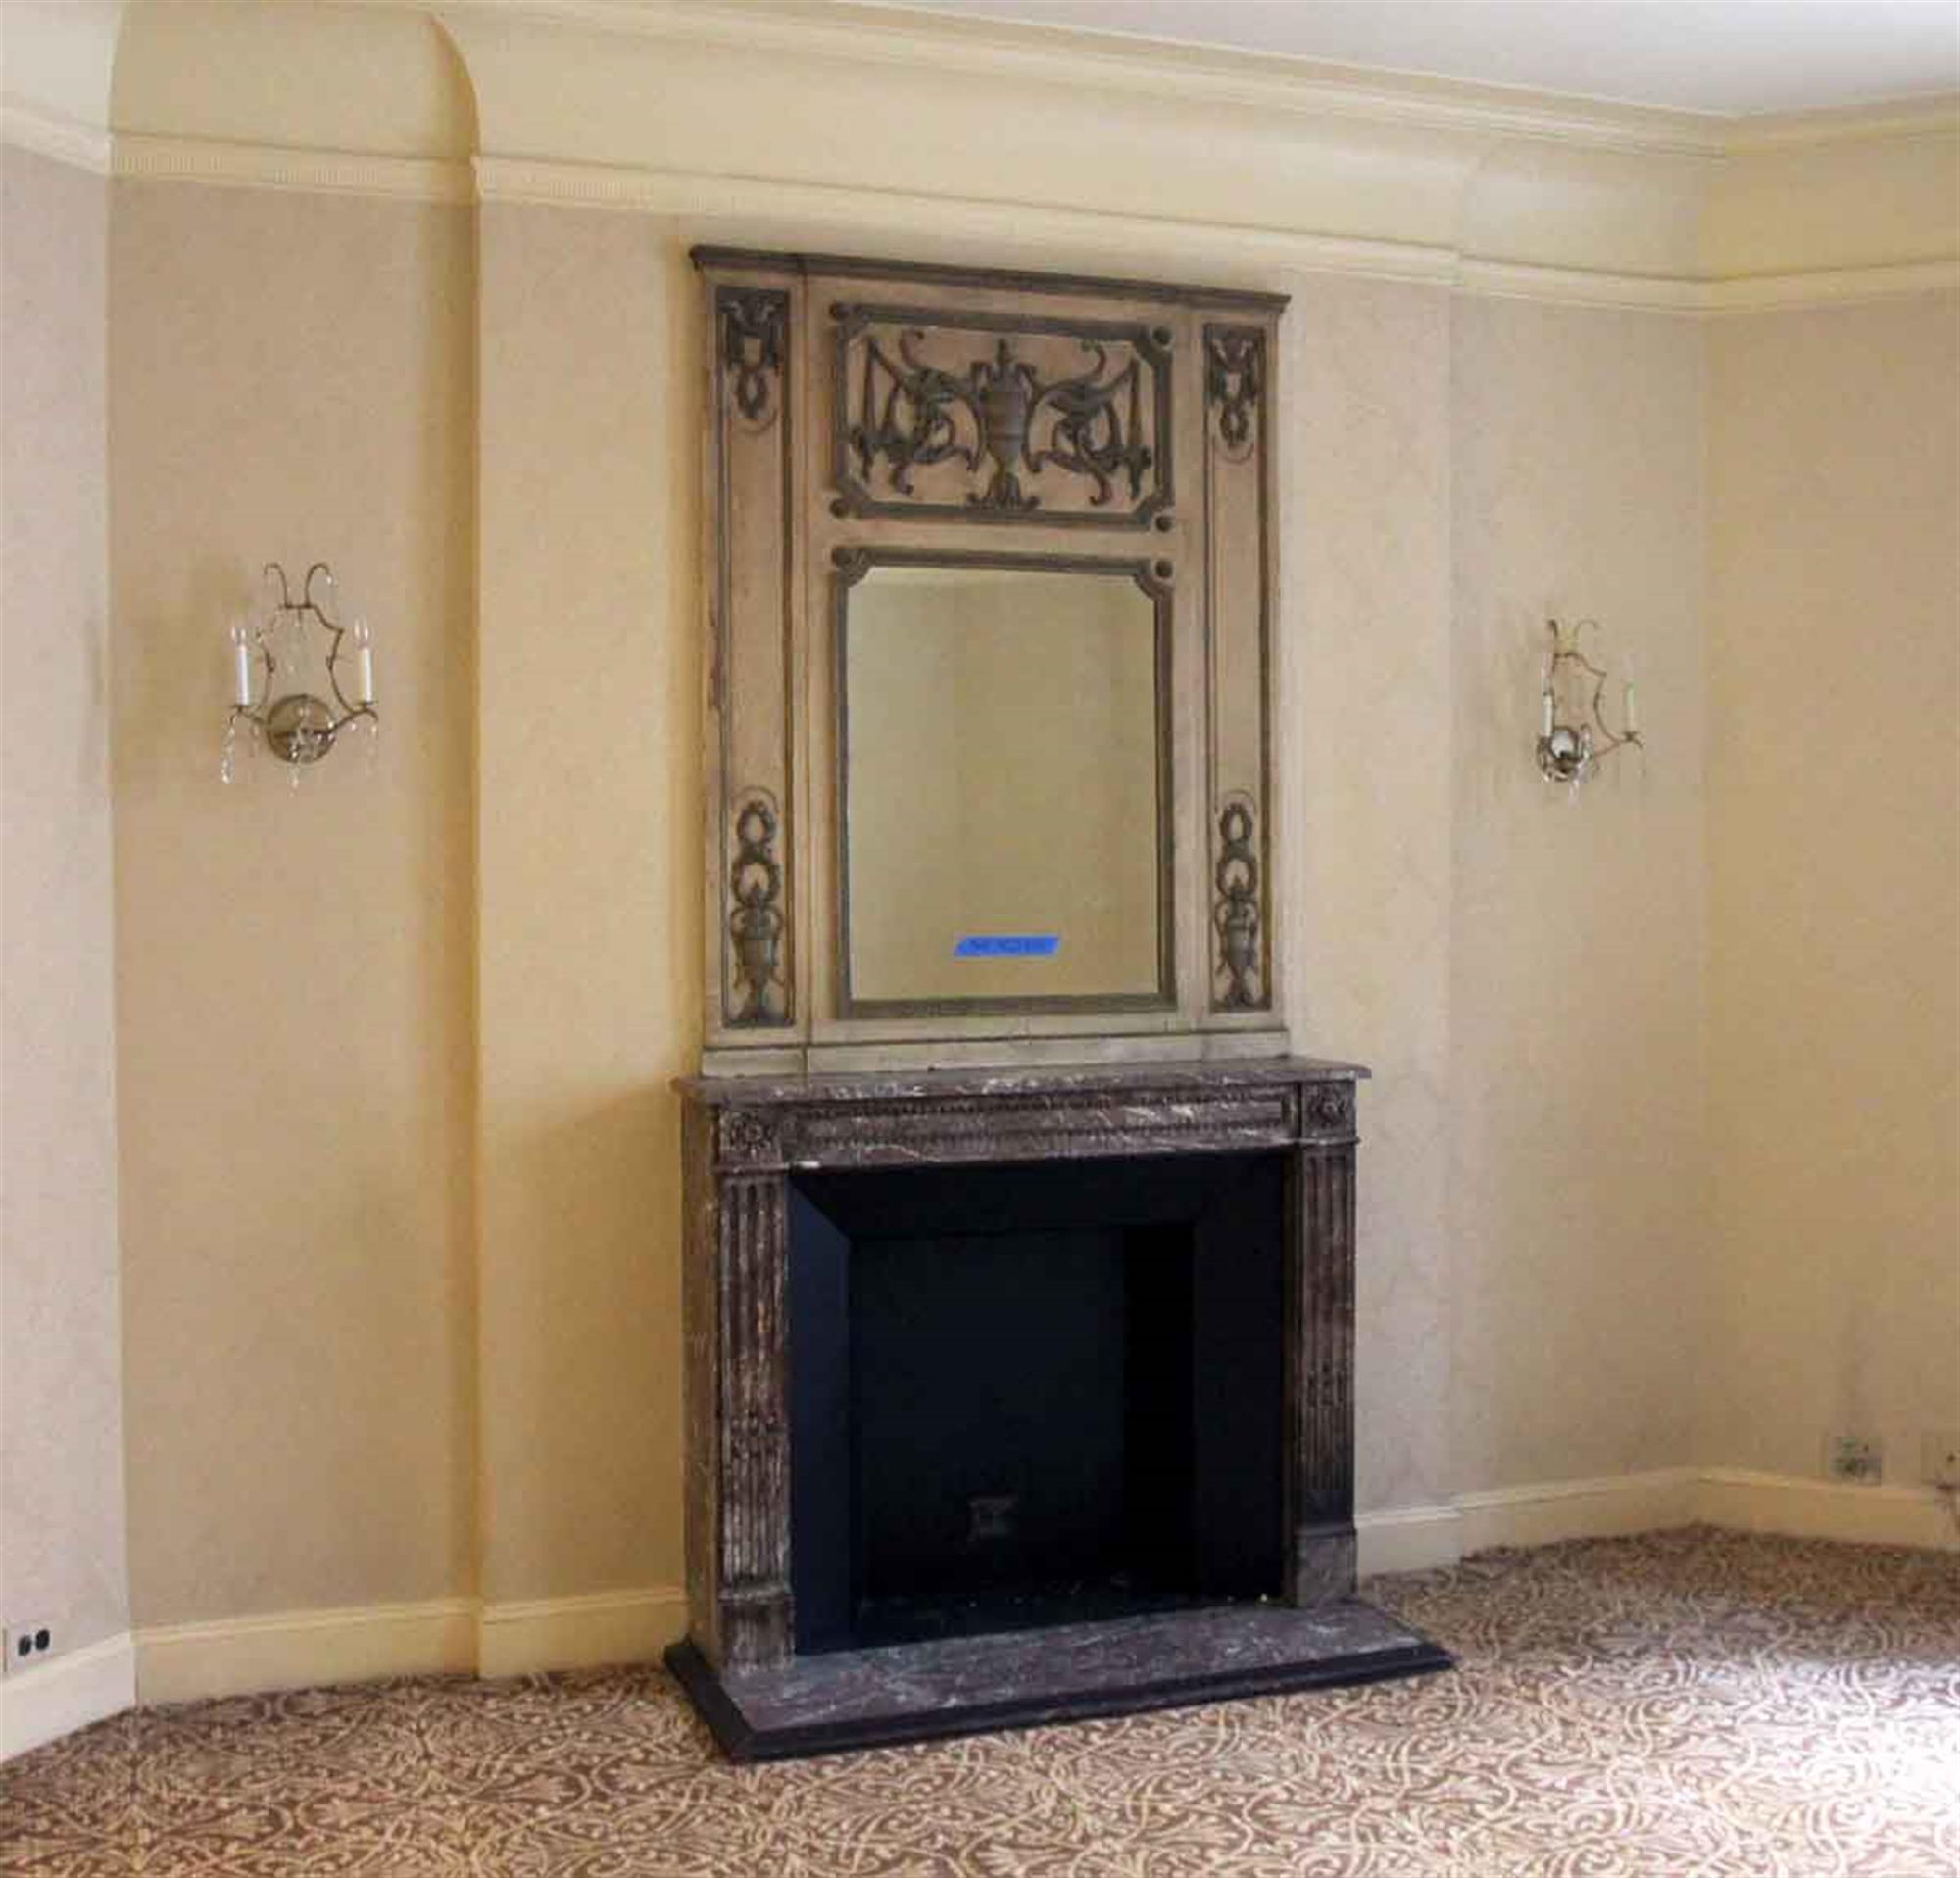 1931 NYC Waldorf Astoria Hotel tan over mantel mirror with carved wood details and a large urn in the top center. From room 964. Brought to the US from France for the Hotel. Waldorf Astoria authenticity card included with your purchase. This can be